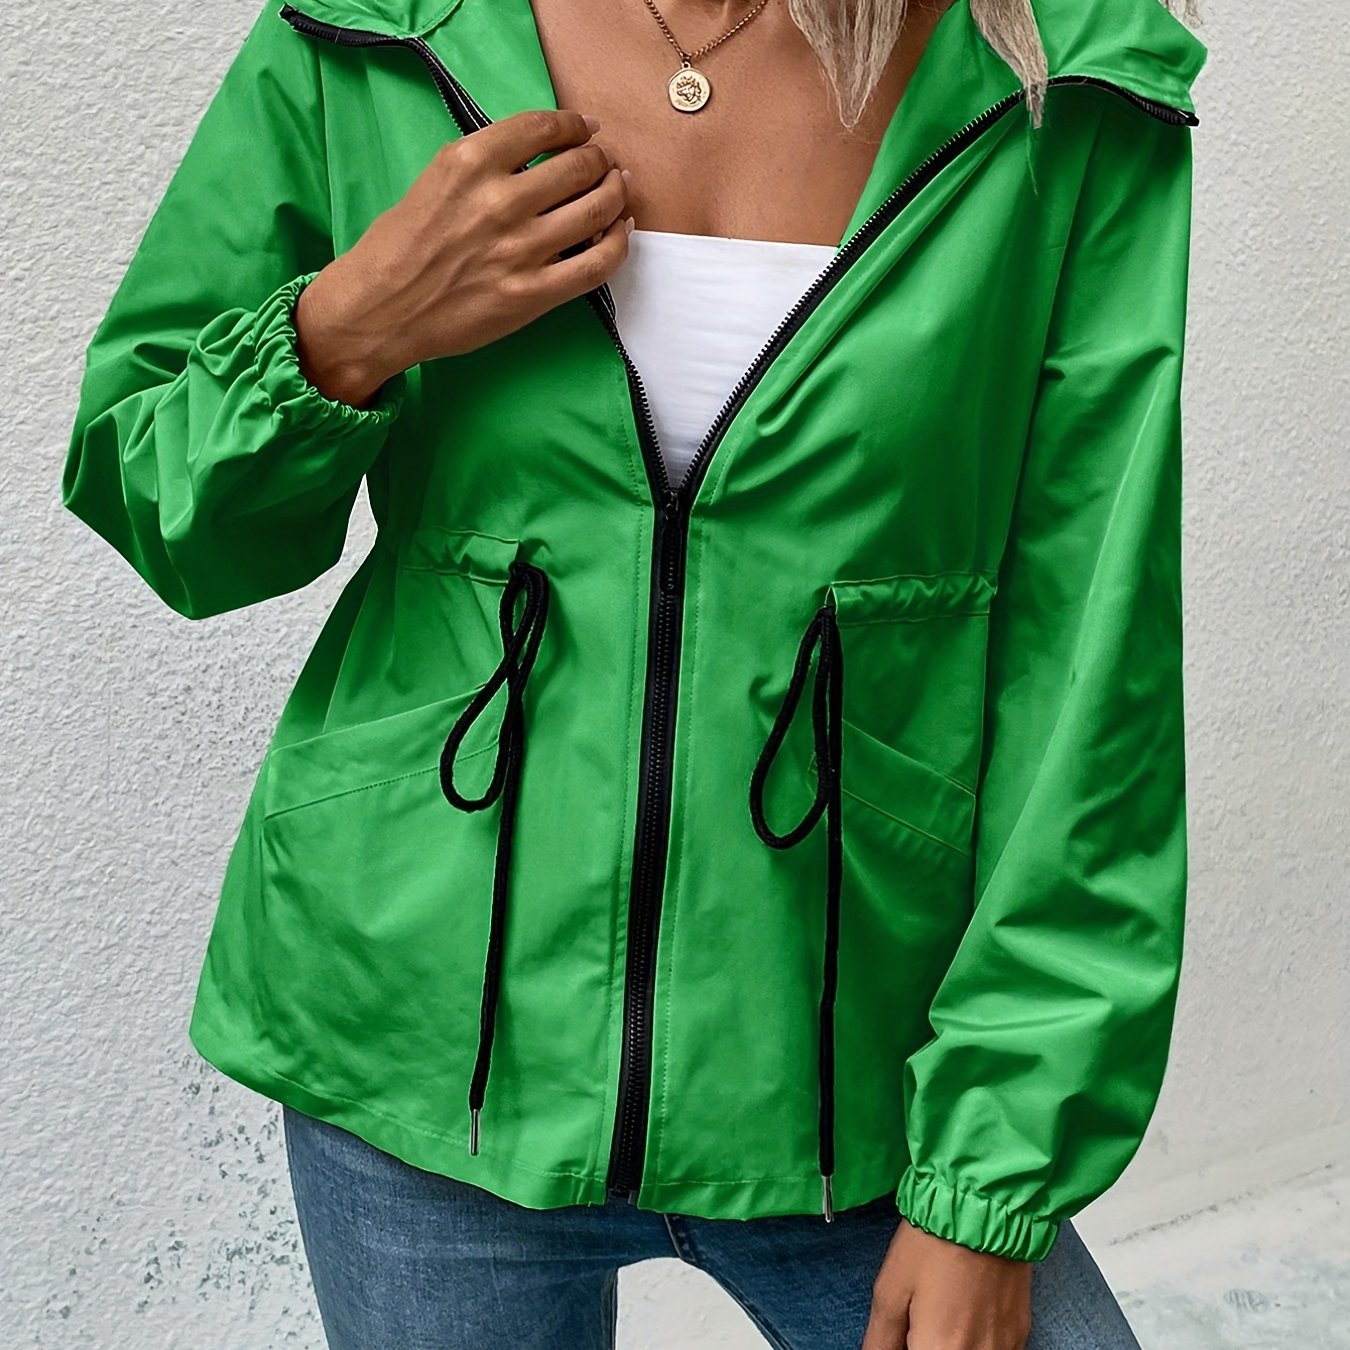 Antmvs Solid Drawstring Windproof Jacket, Casual Long Sleeve Hooded Zip Up Outerwear With Pockets, Women's Clothing